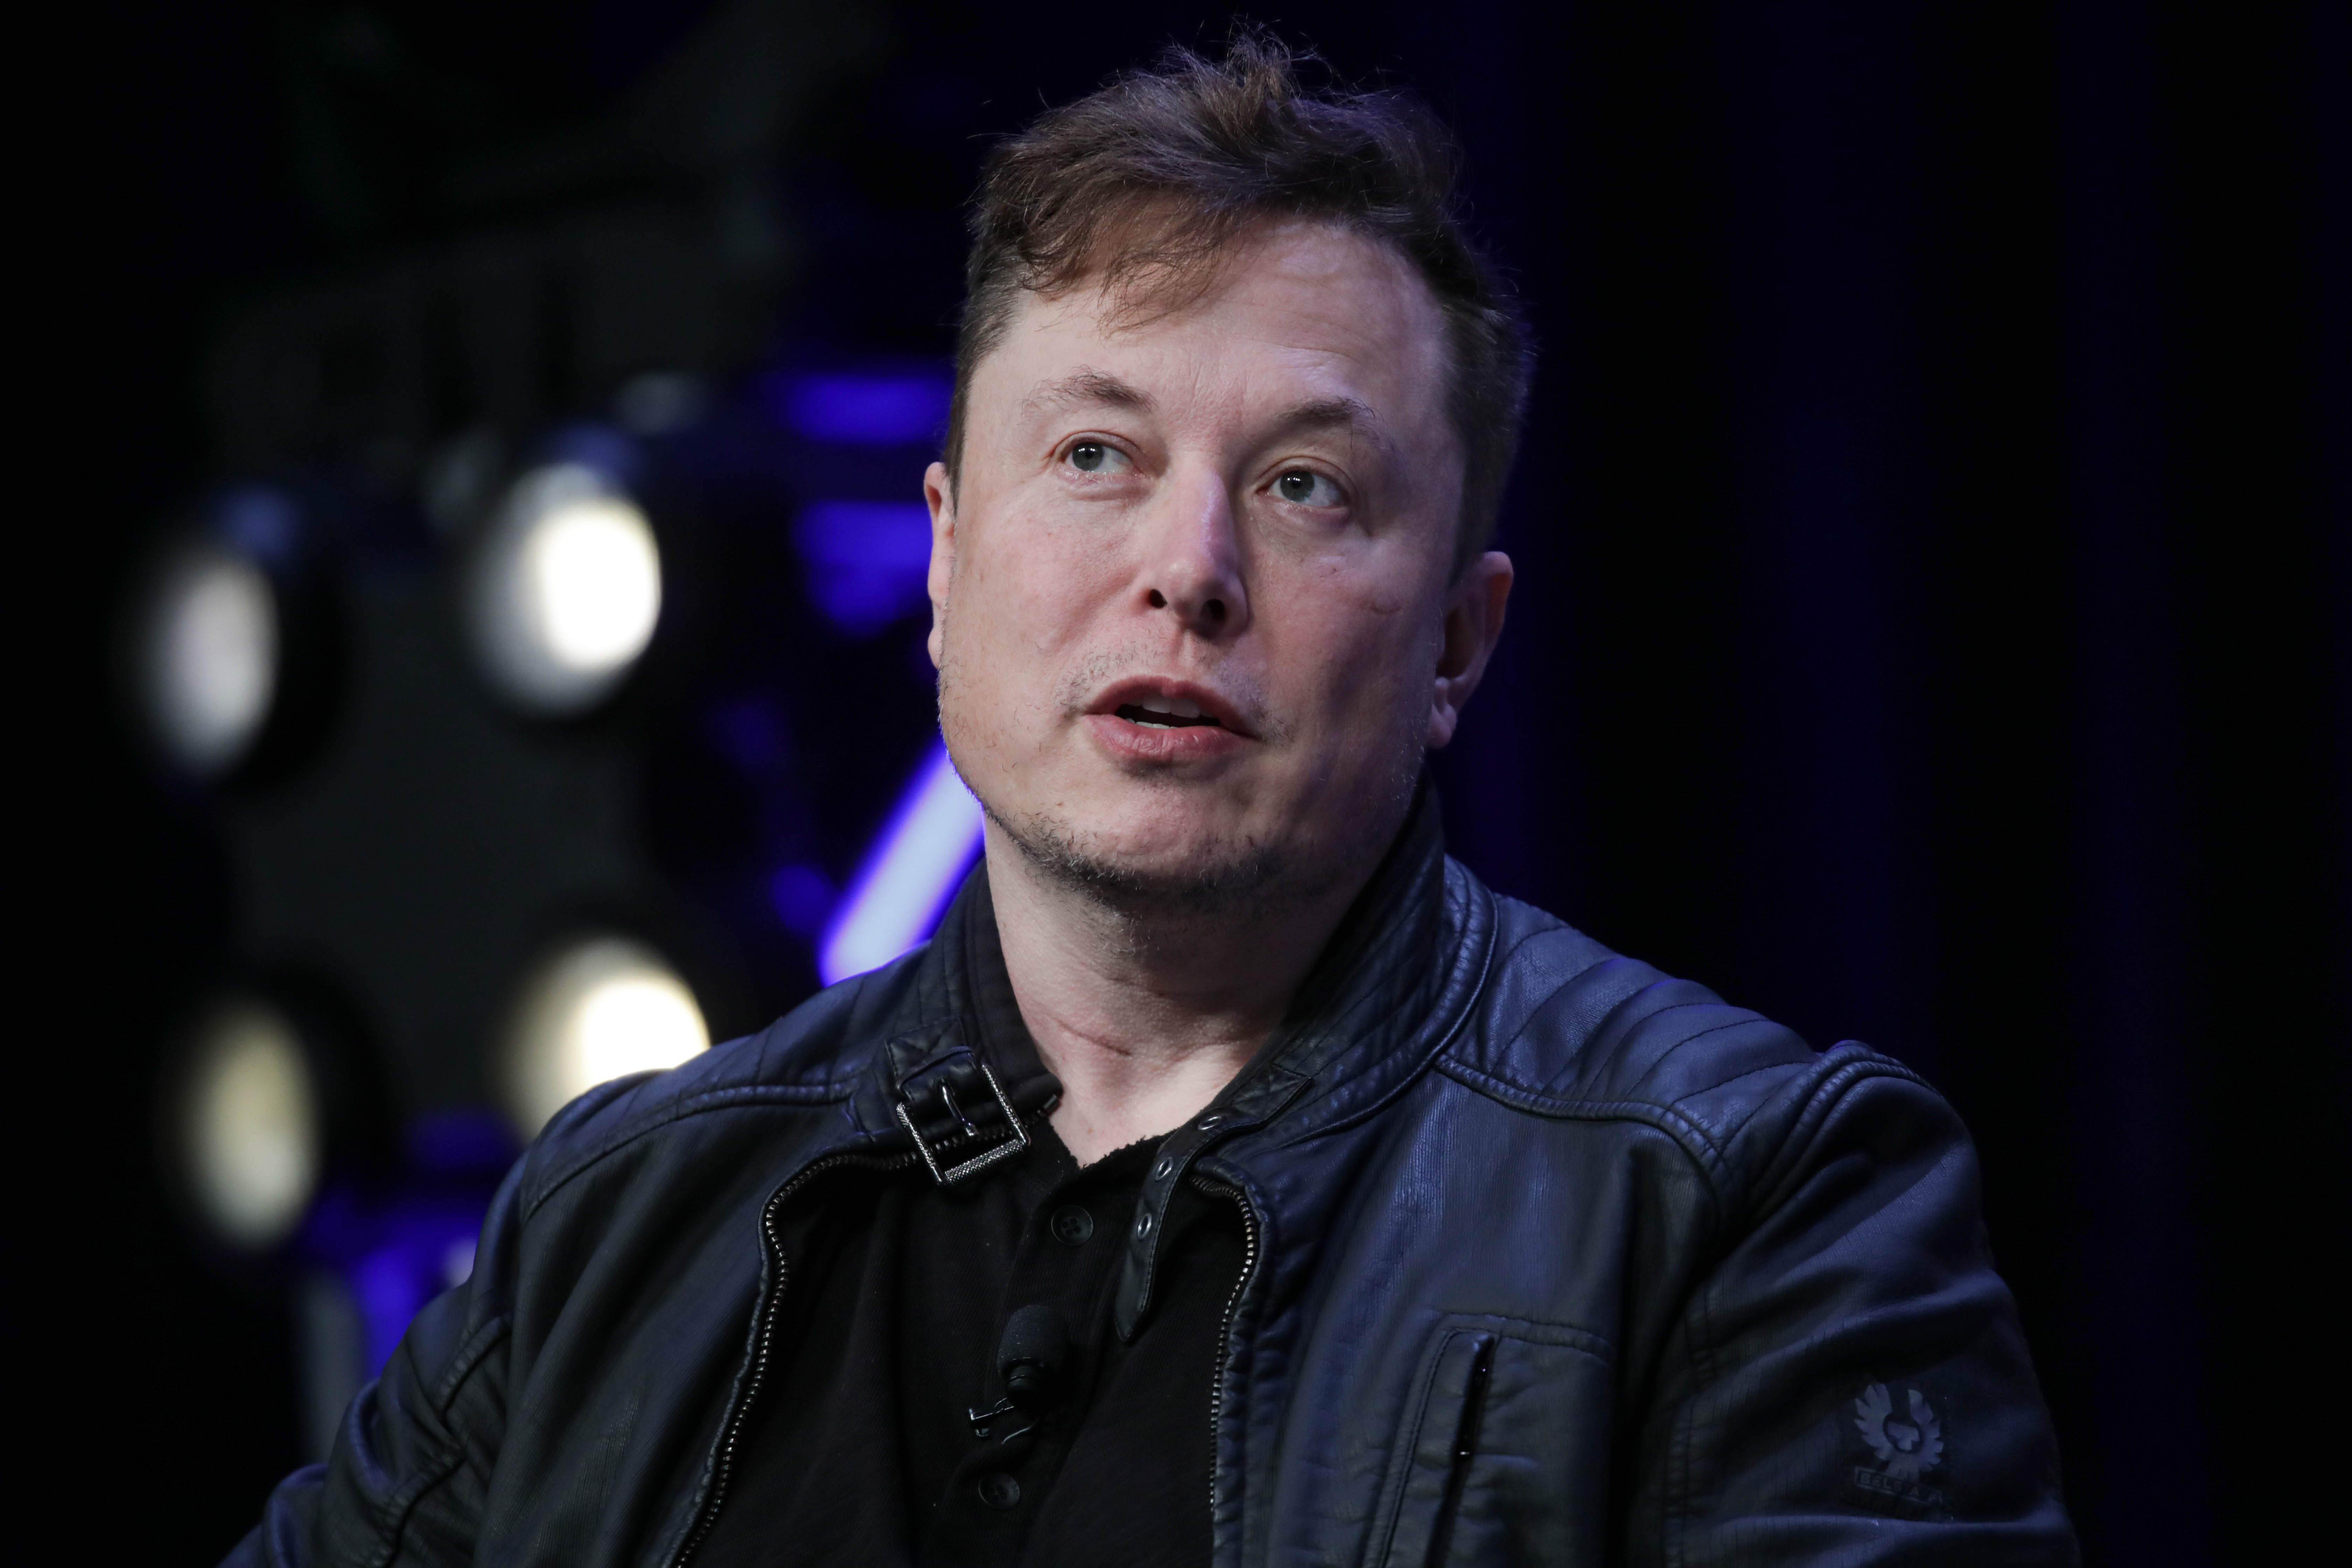 Twitter abuse victims fear Musk's plans for a free speech free-for-all